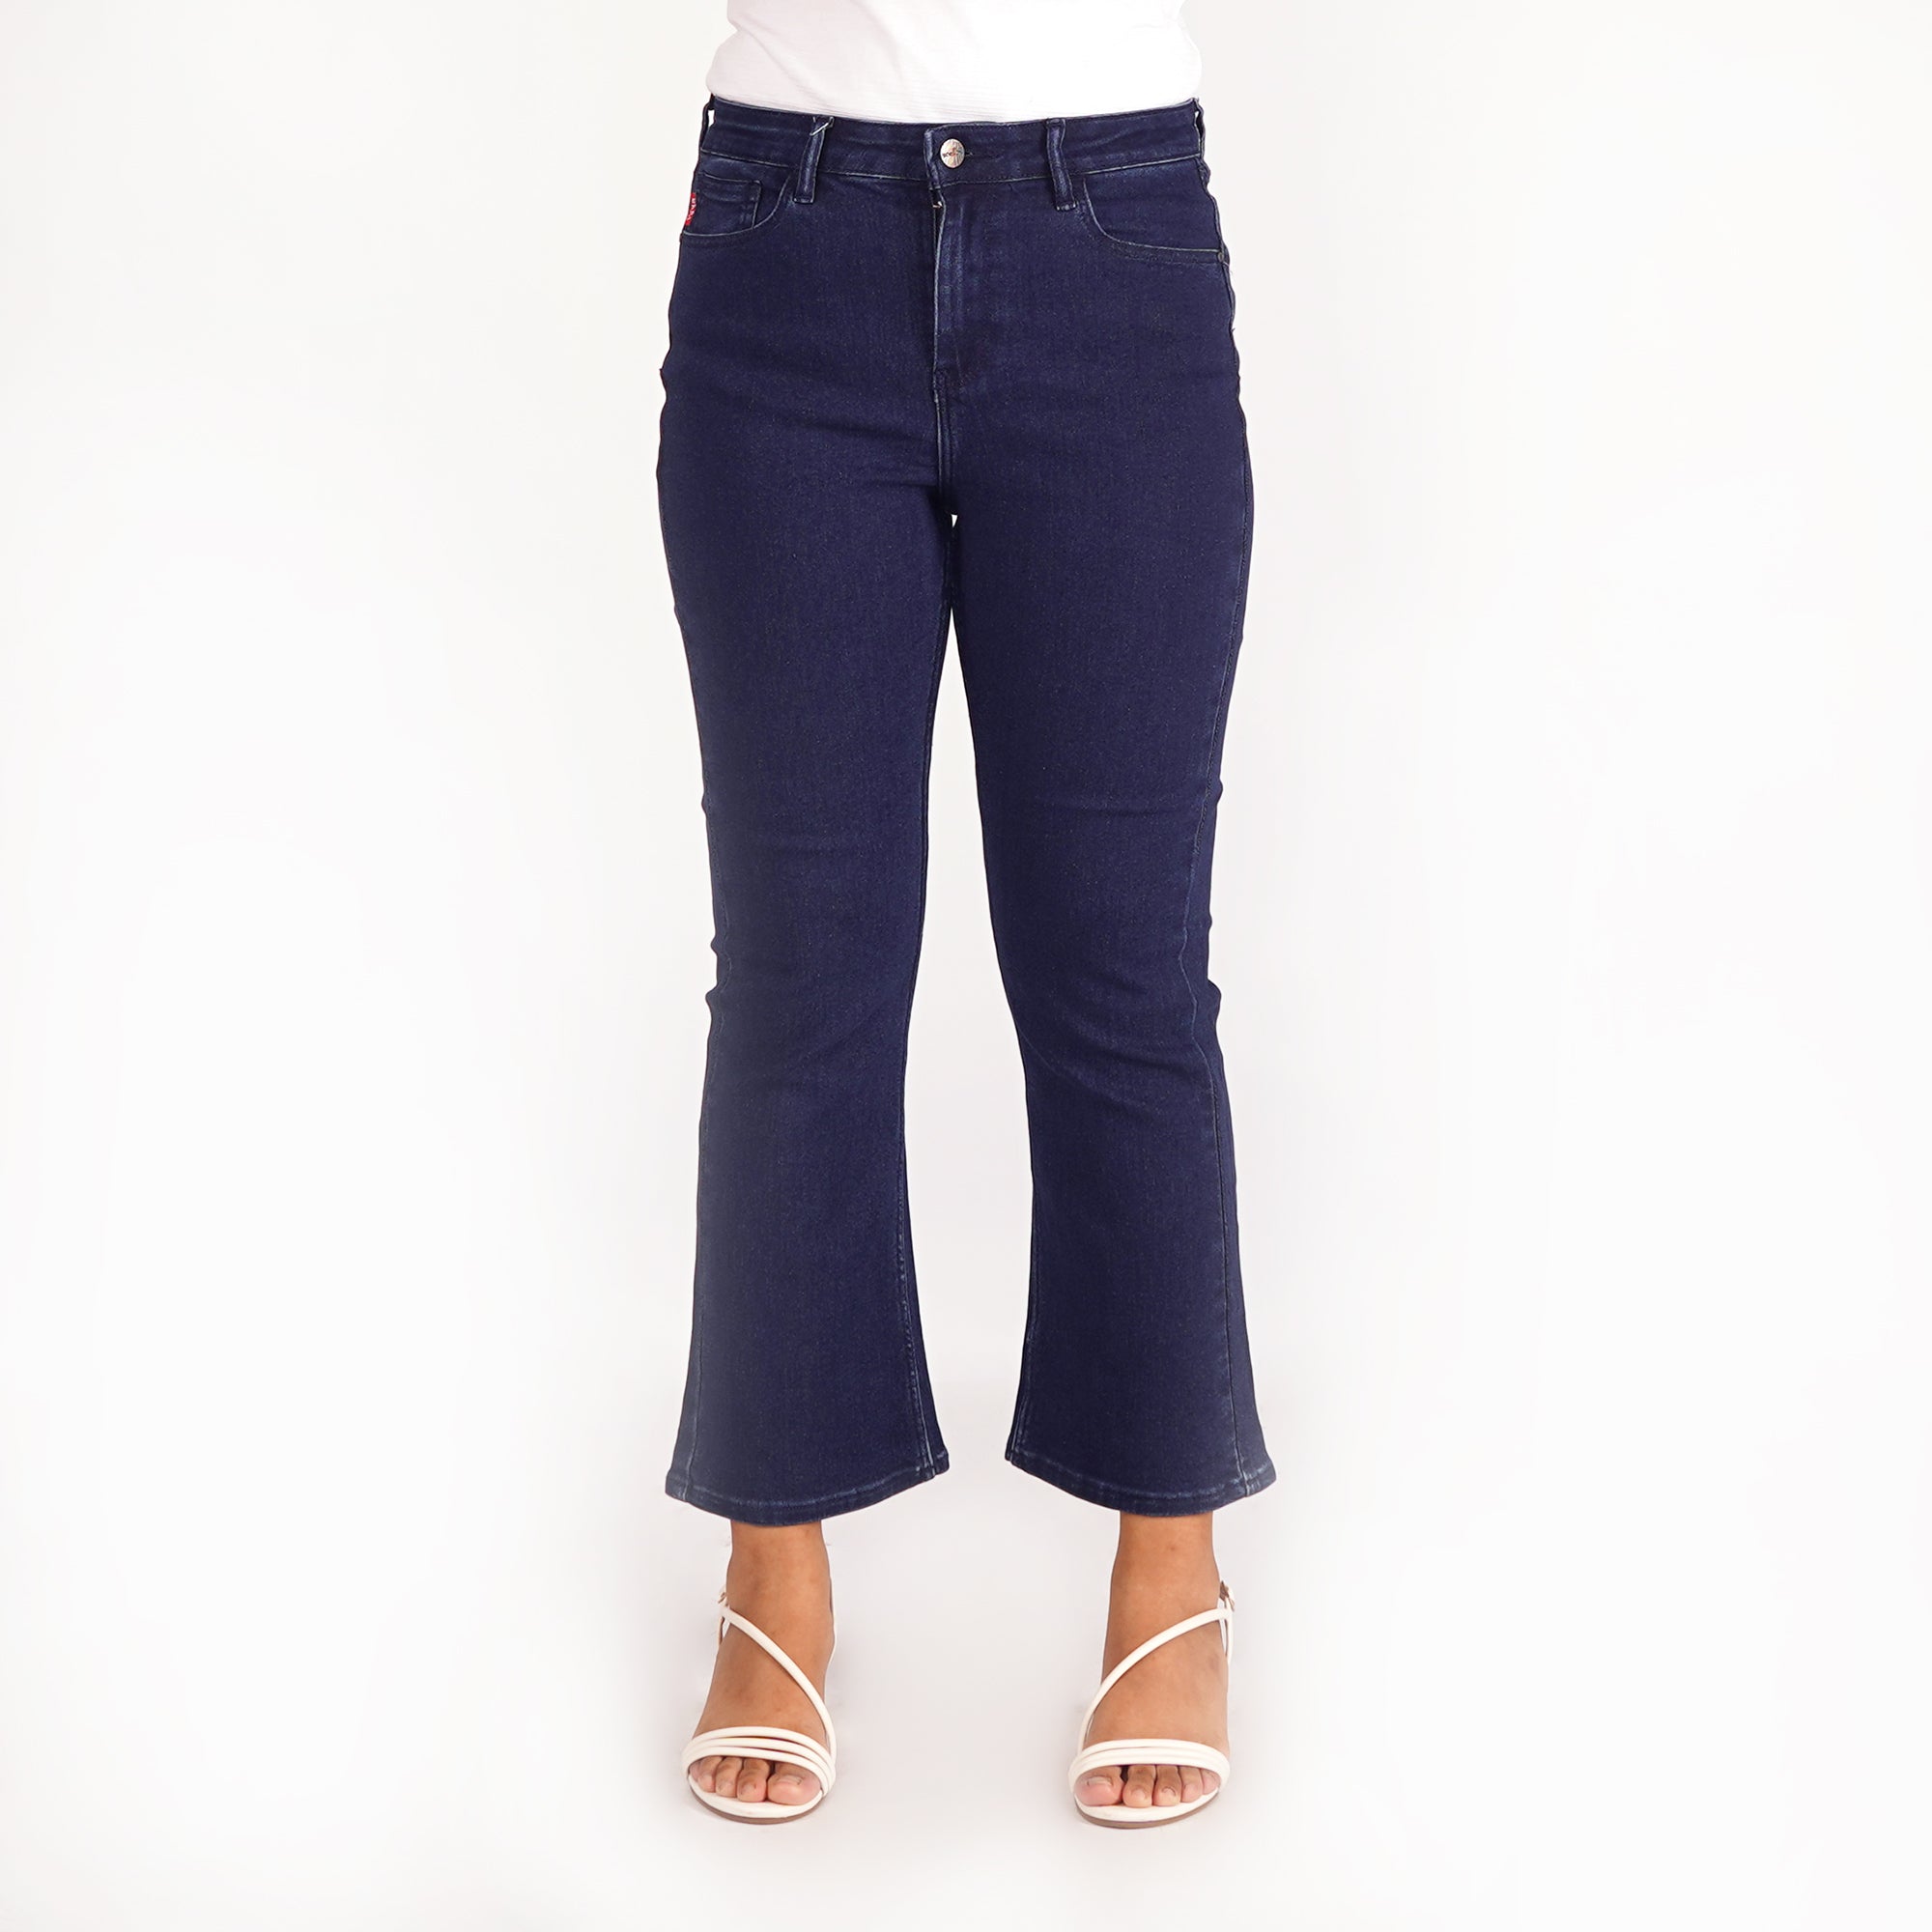 Womens Fashion Women's Casual High Waisted Flare Jeans Pants